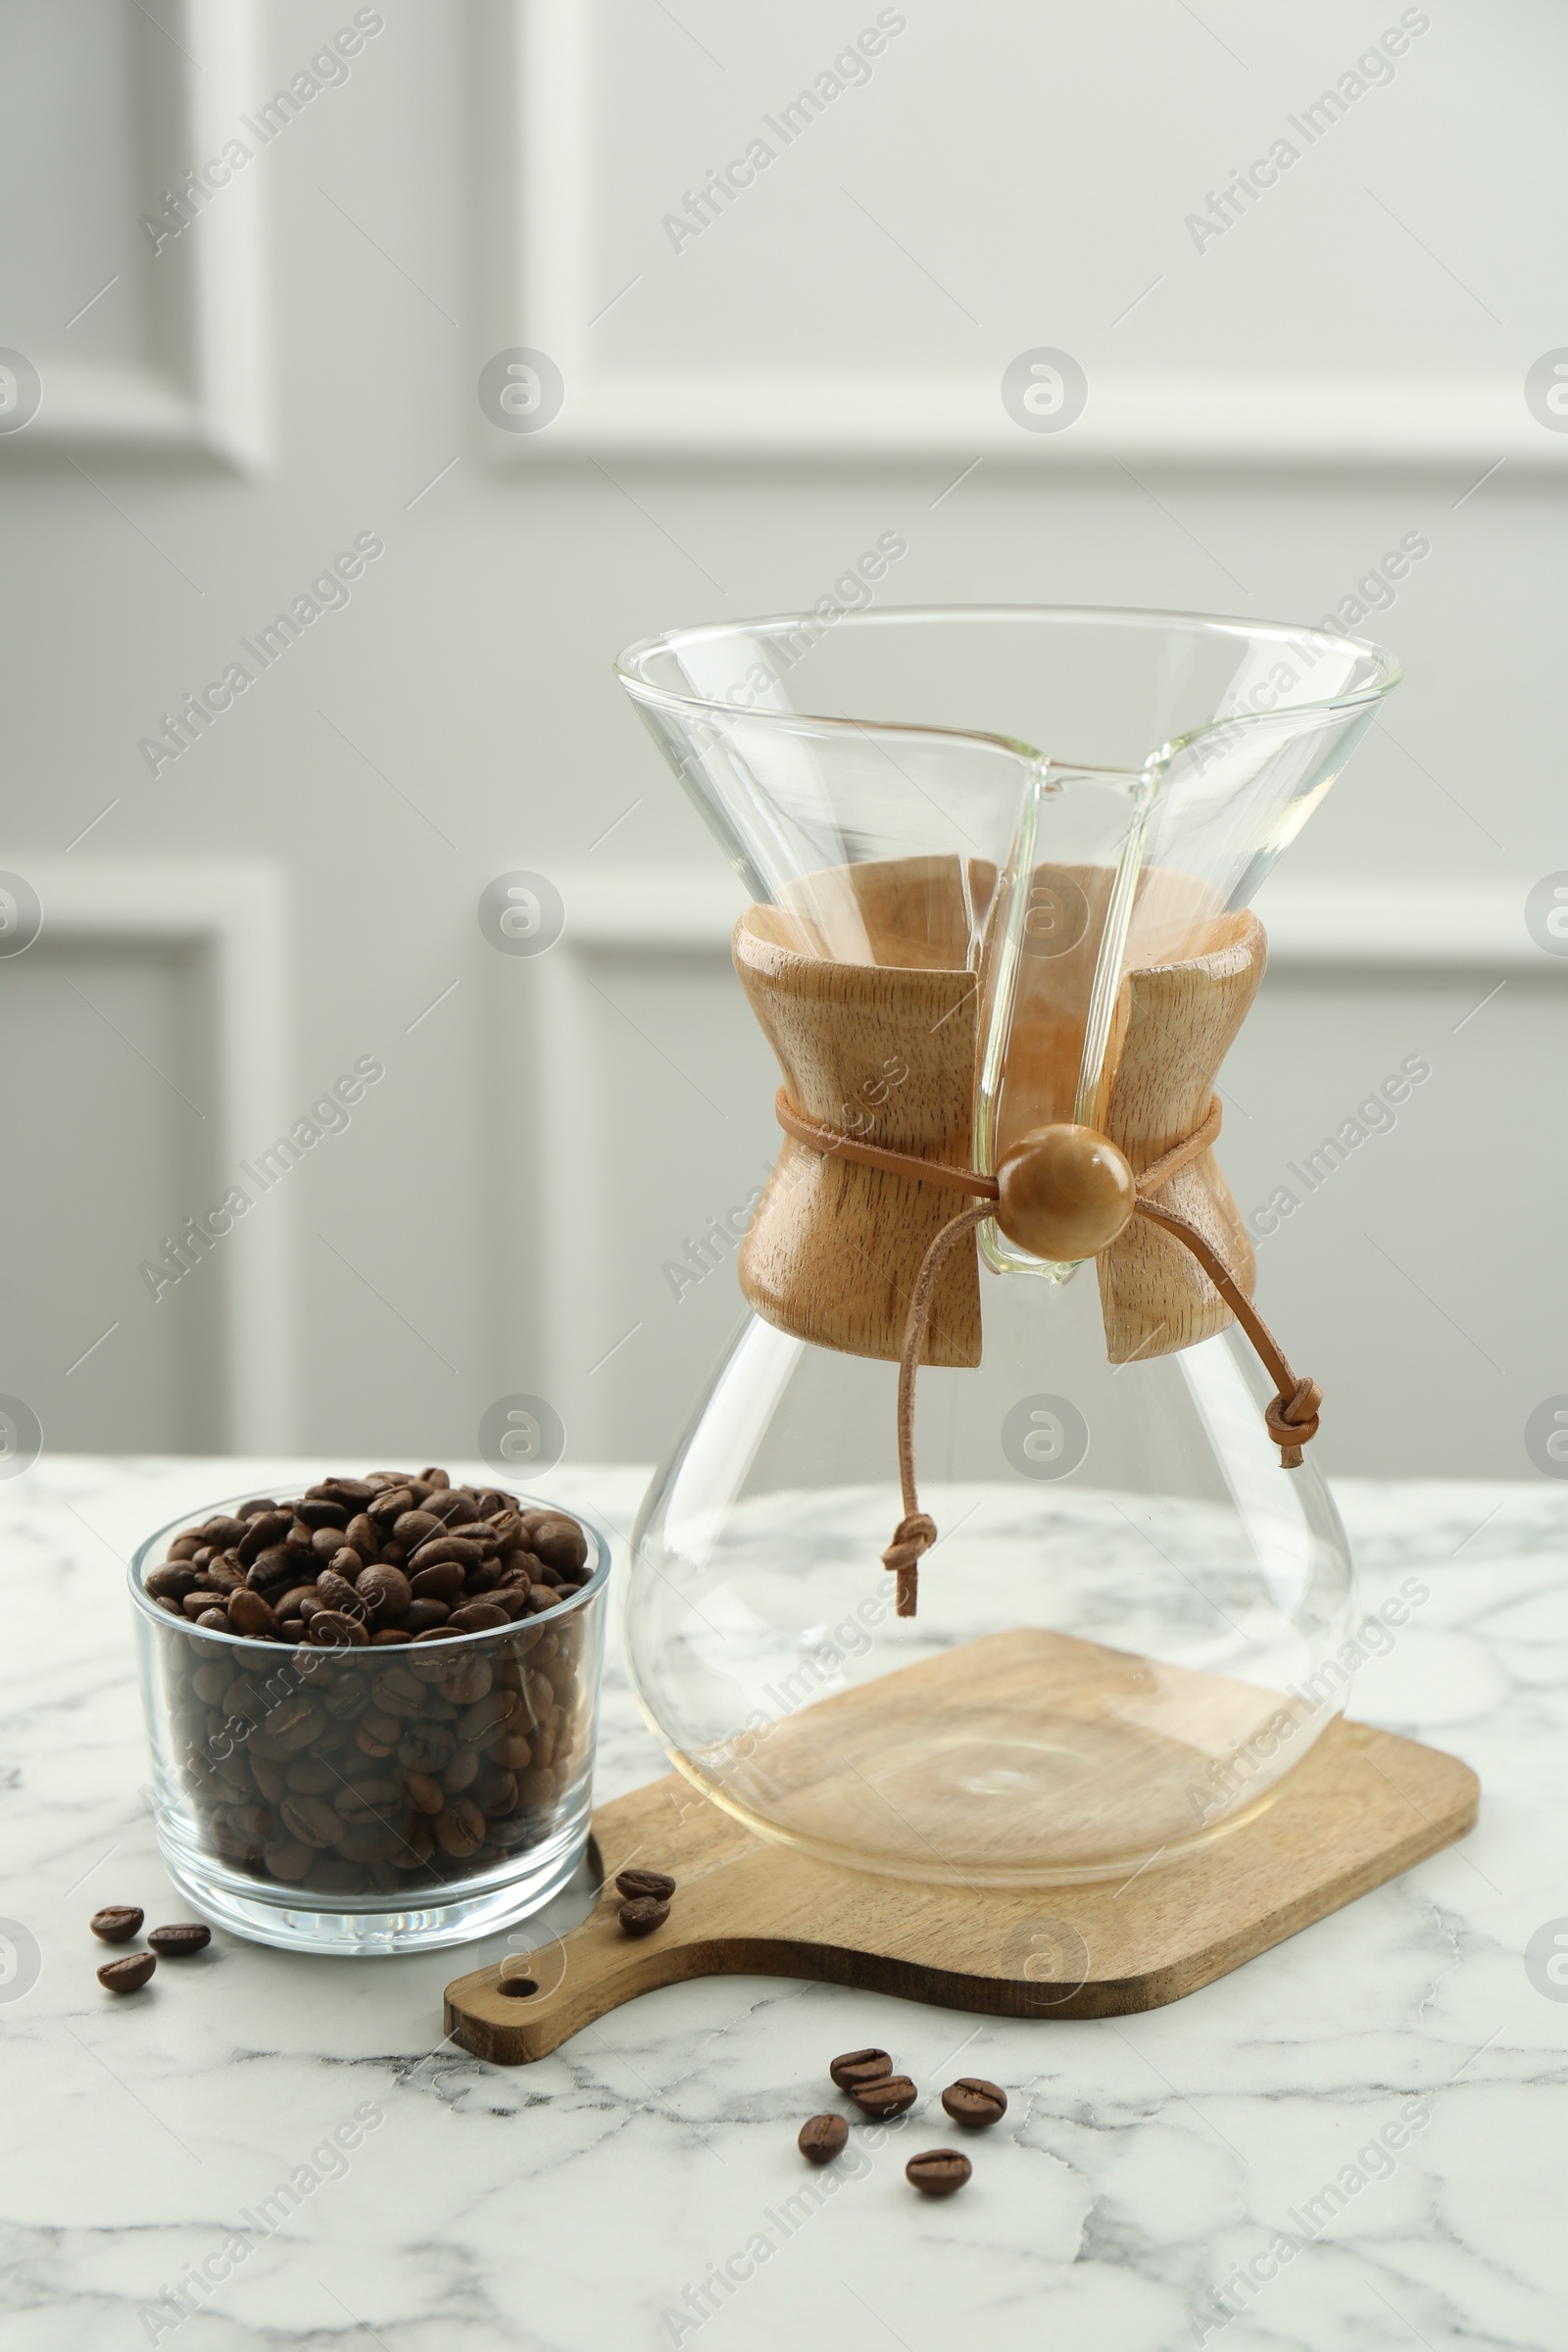 Photo of Empty glass chemex coffeemaker and beans in bowl on white marble table